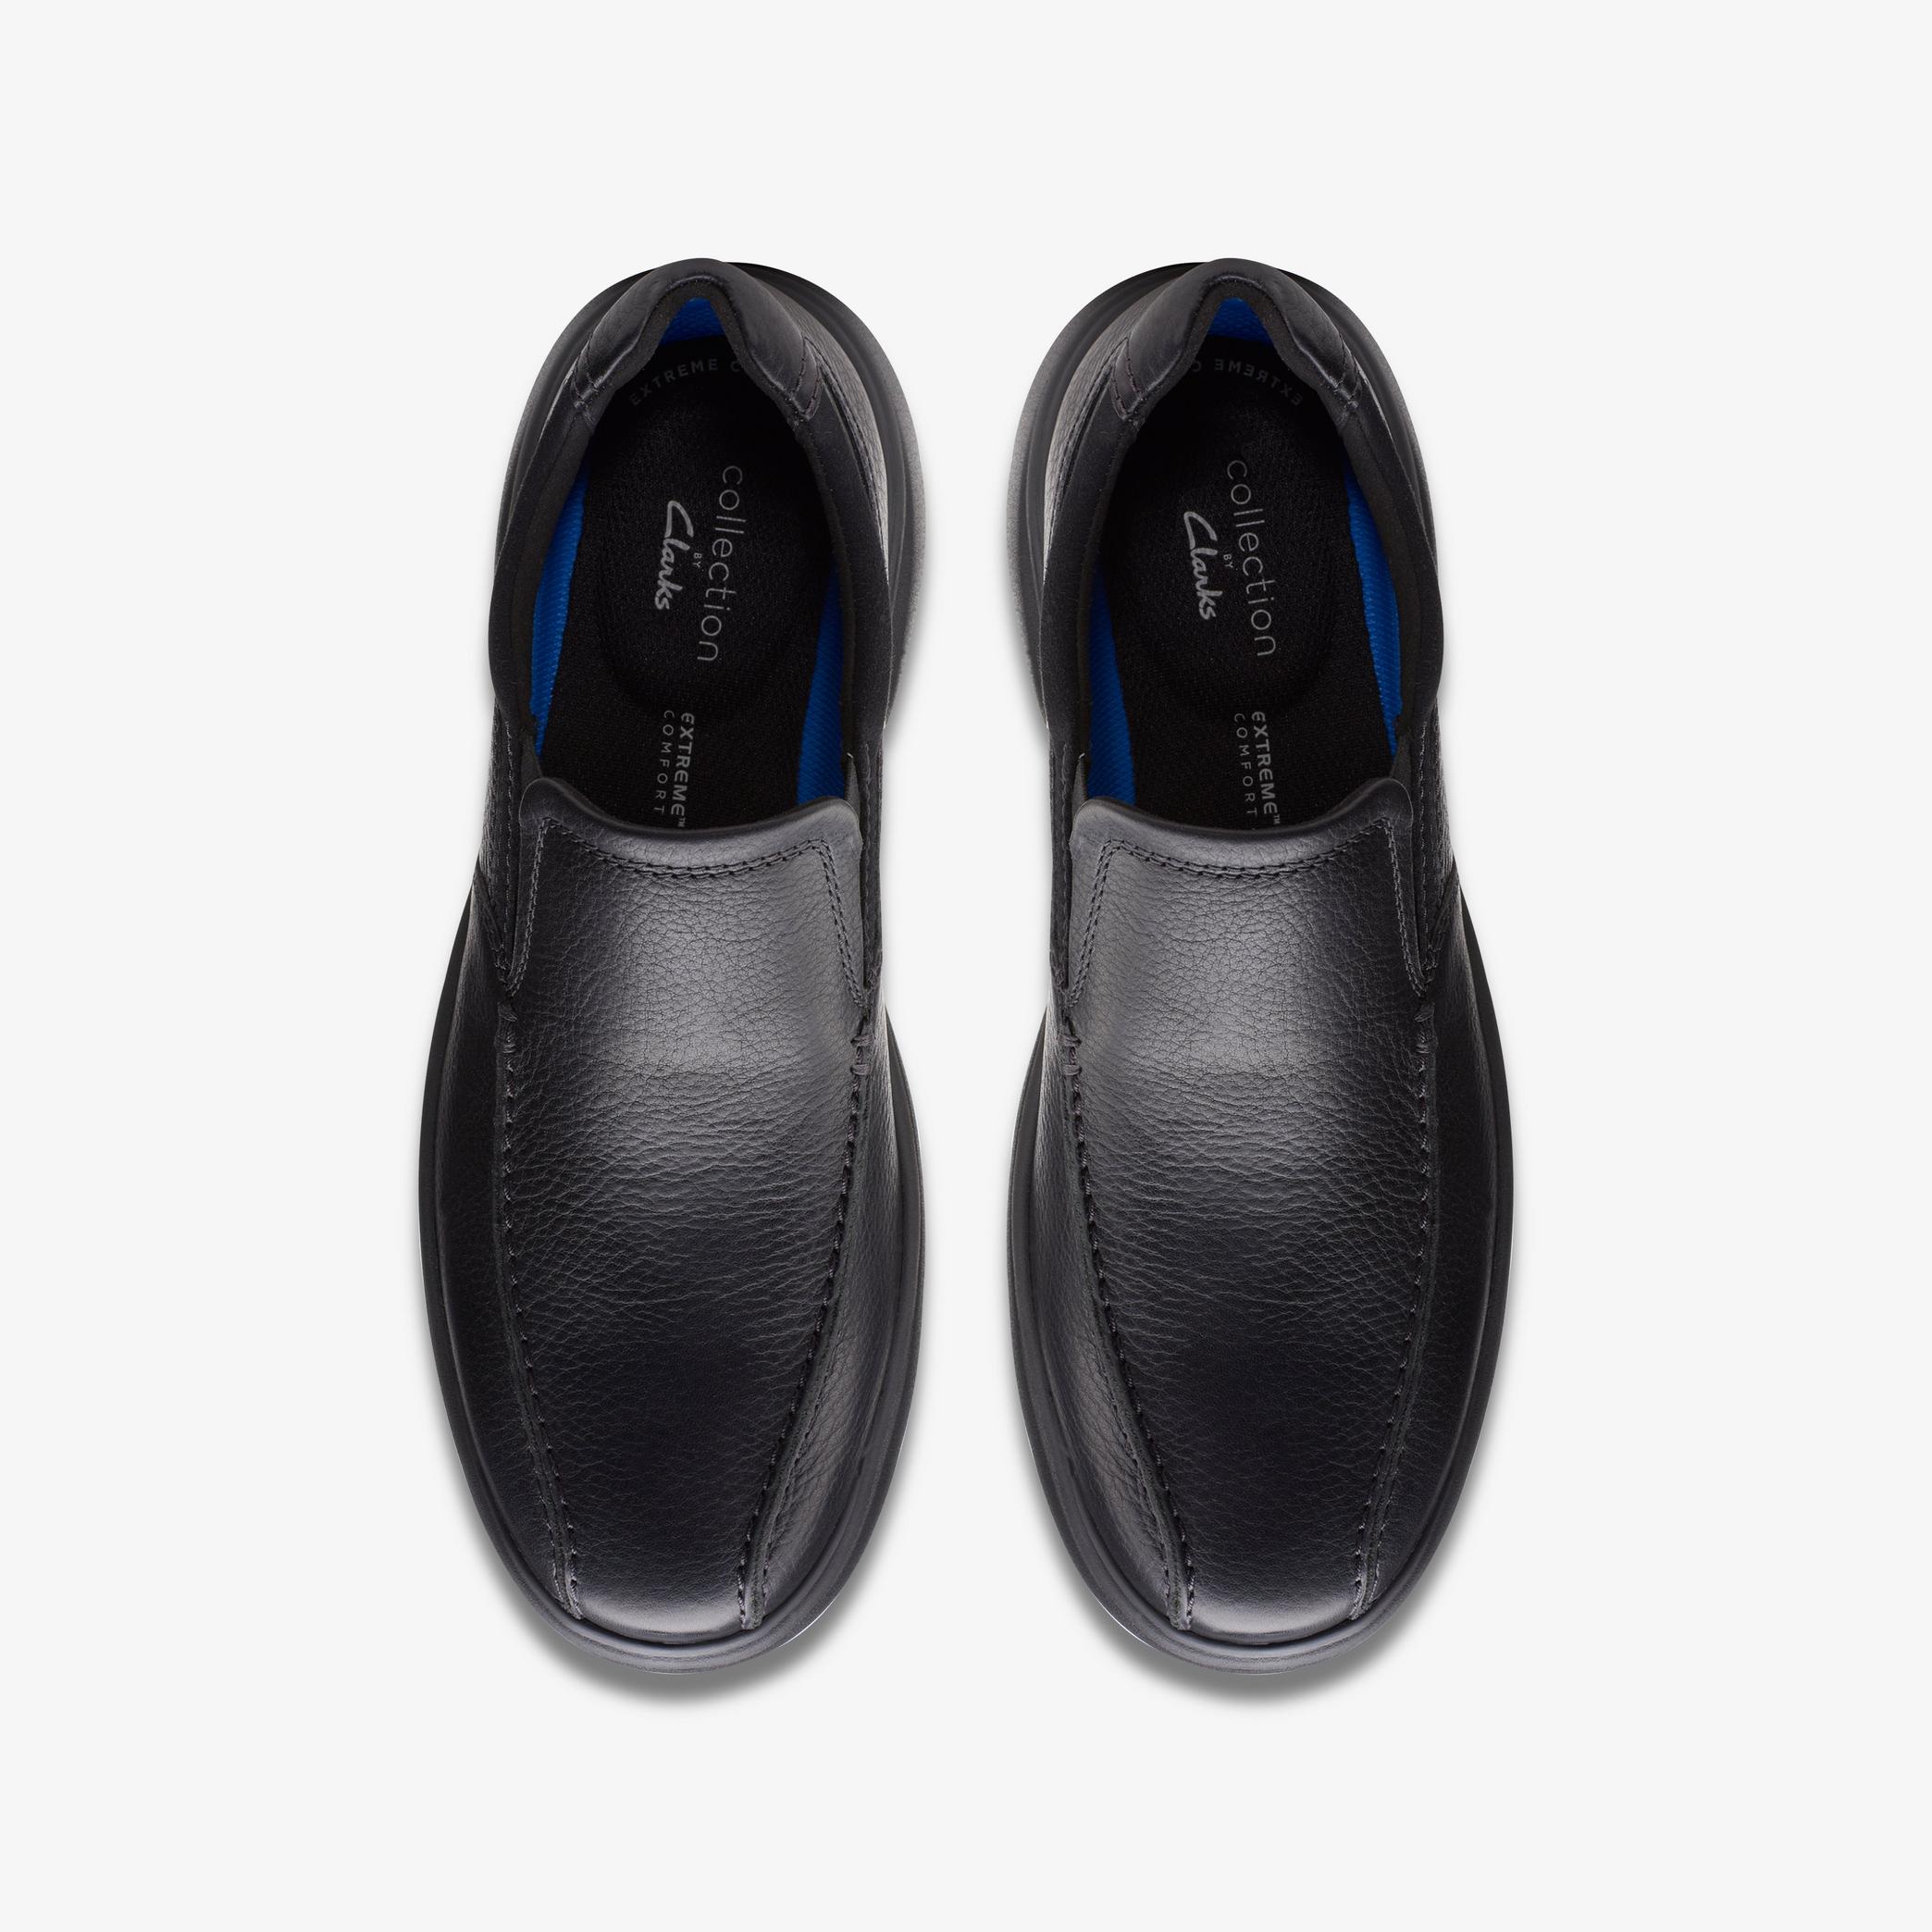 Bradley Step Black Tumbled Leather Loafers, view 6 of 6